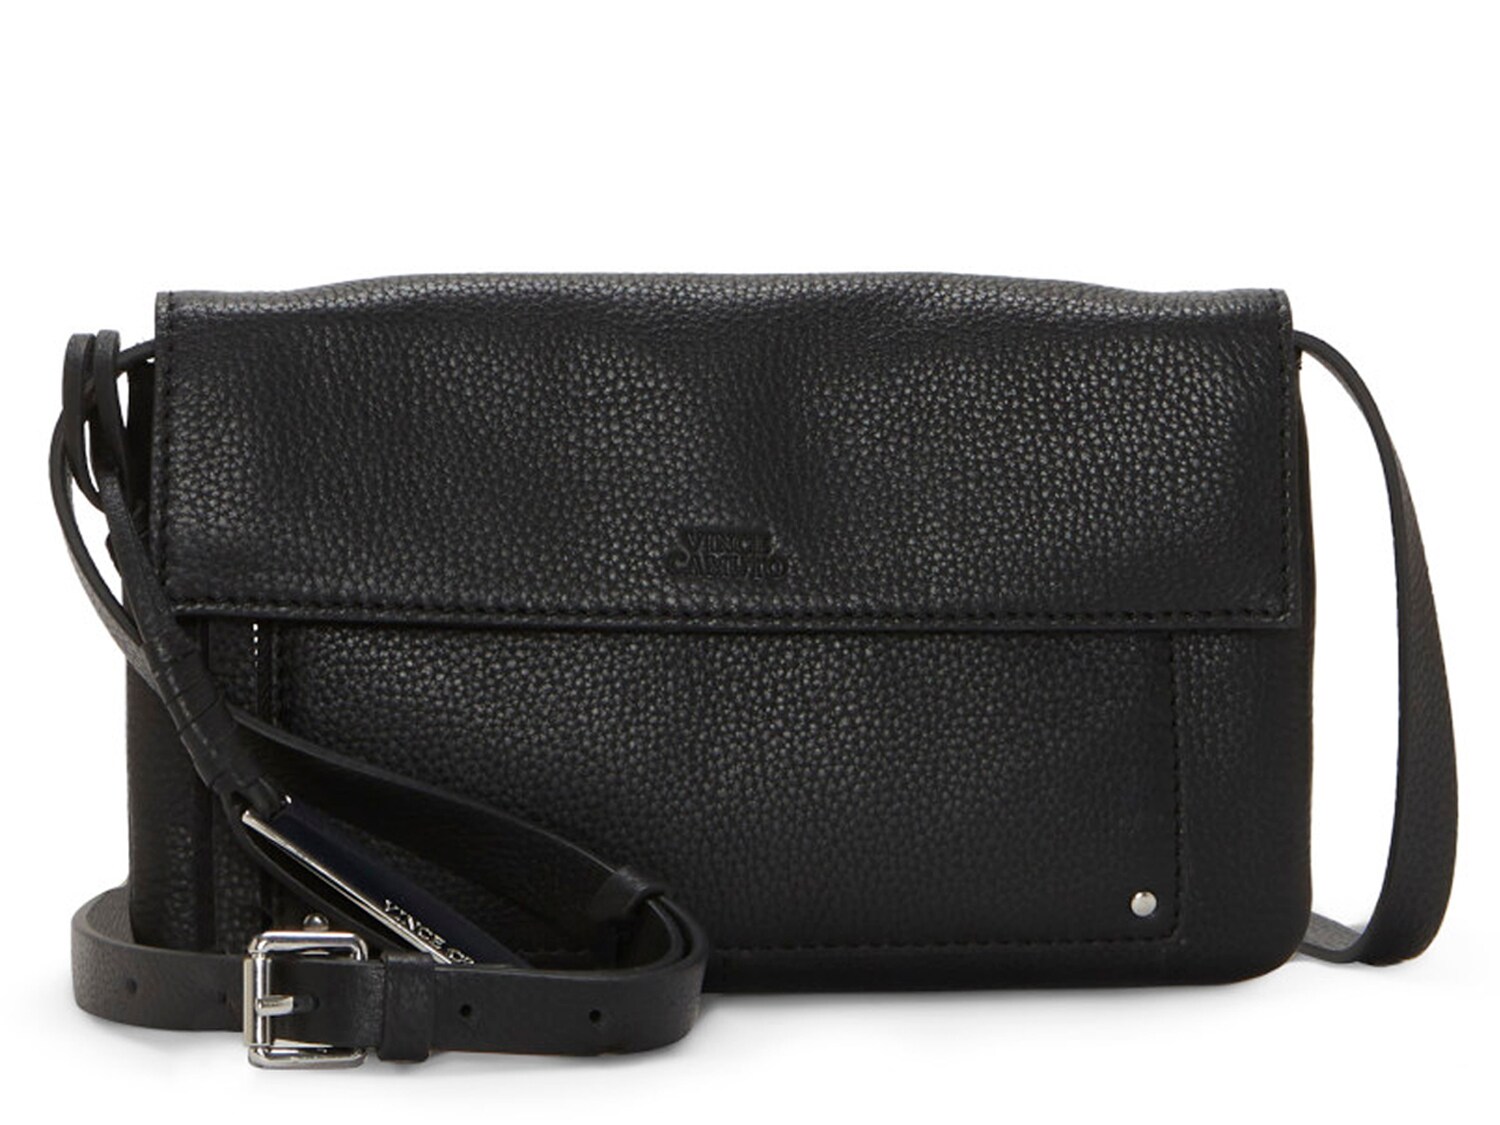 Vince Camuto Rylan Leather Crossbody Bag - Free Shipping | DSW